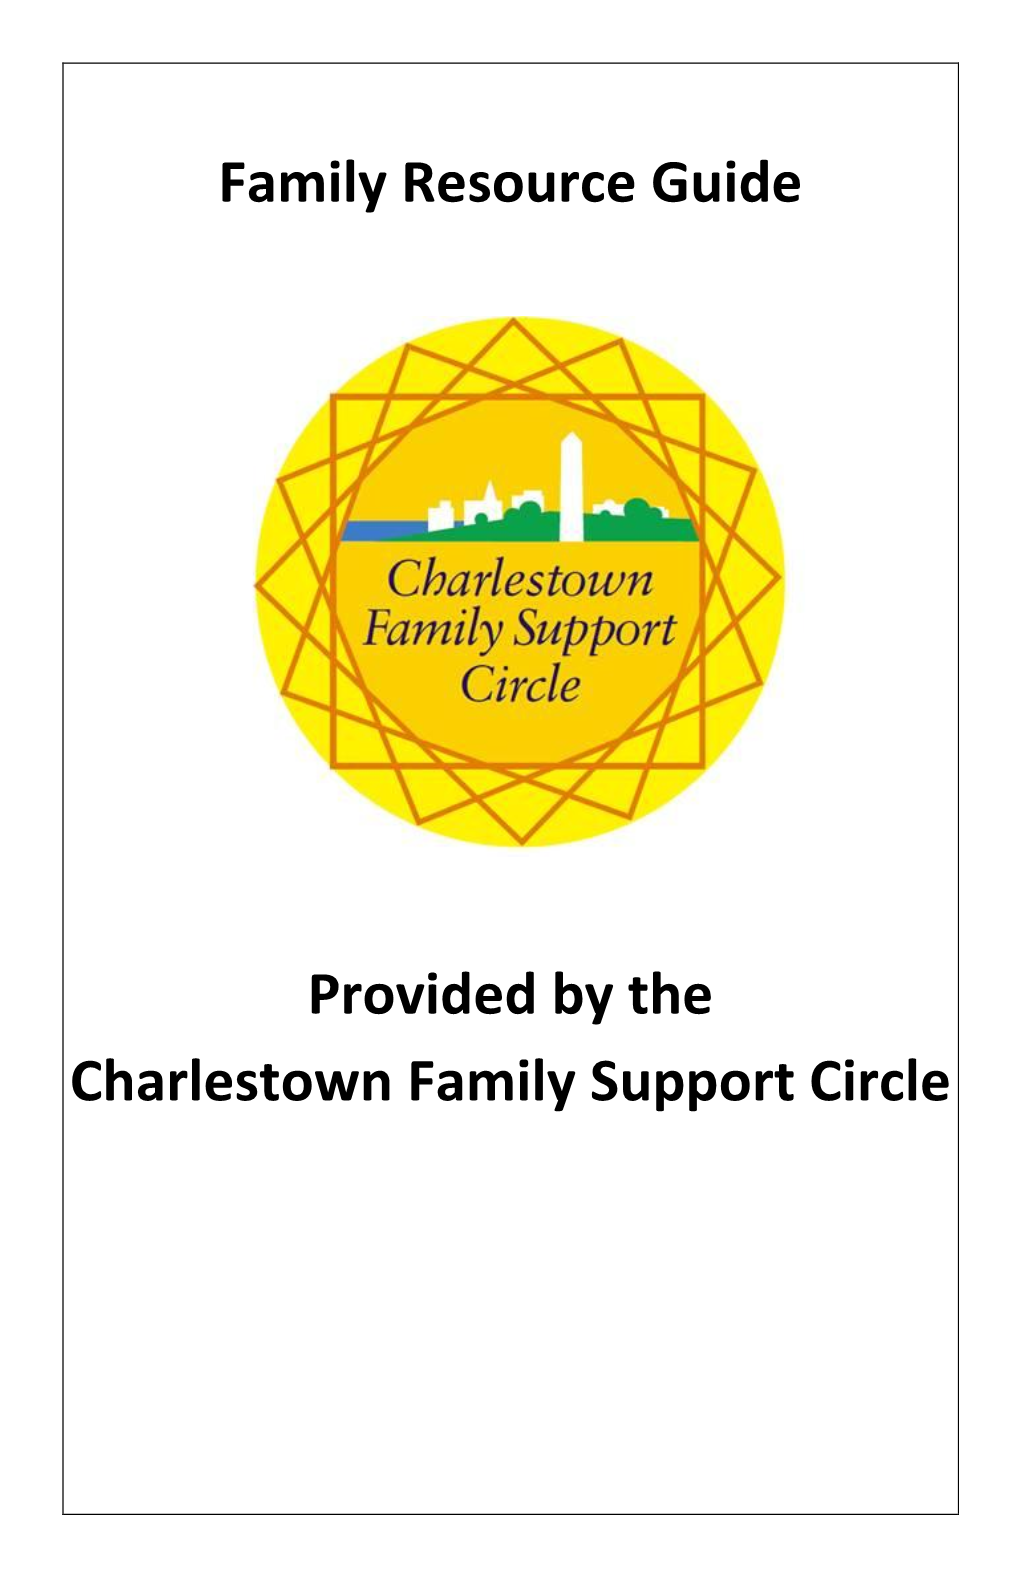 Family Resource Guide Provided by the Charlestown Family Support Circle